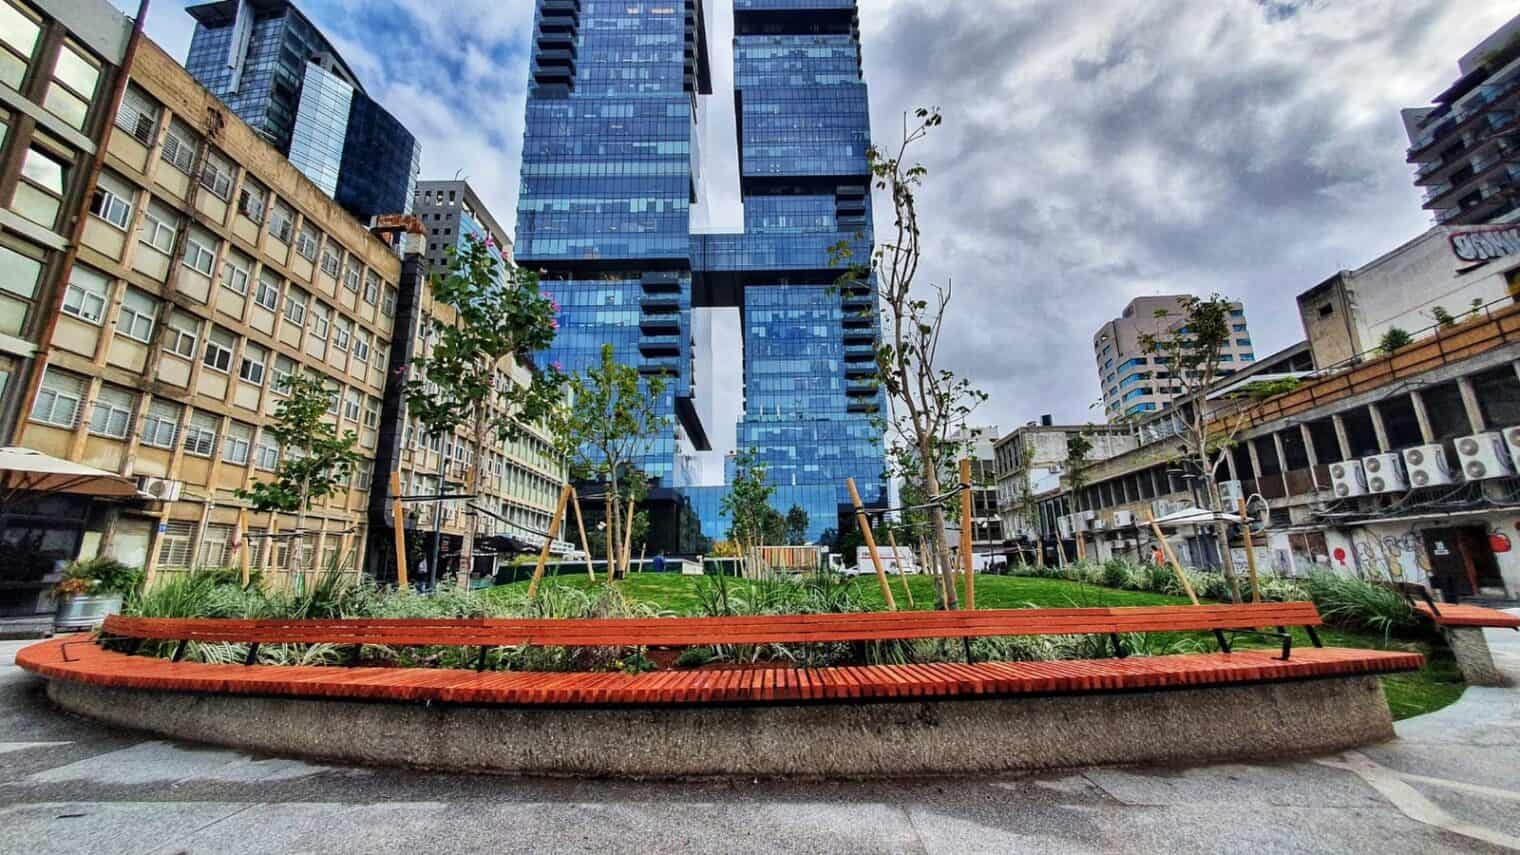 Givon Square in Tel Aviv, transformed into an urban oasis. Photo by Avi Levy